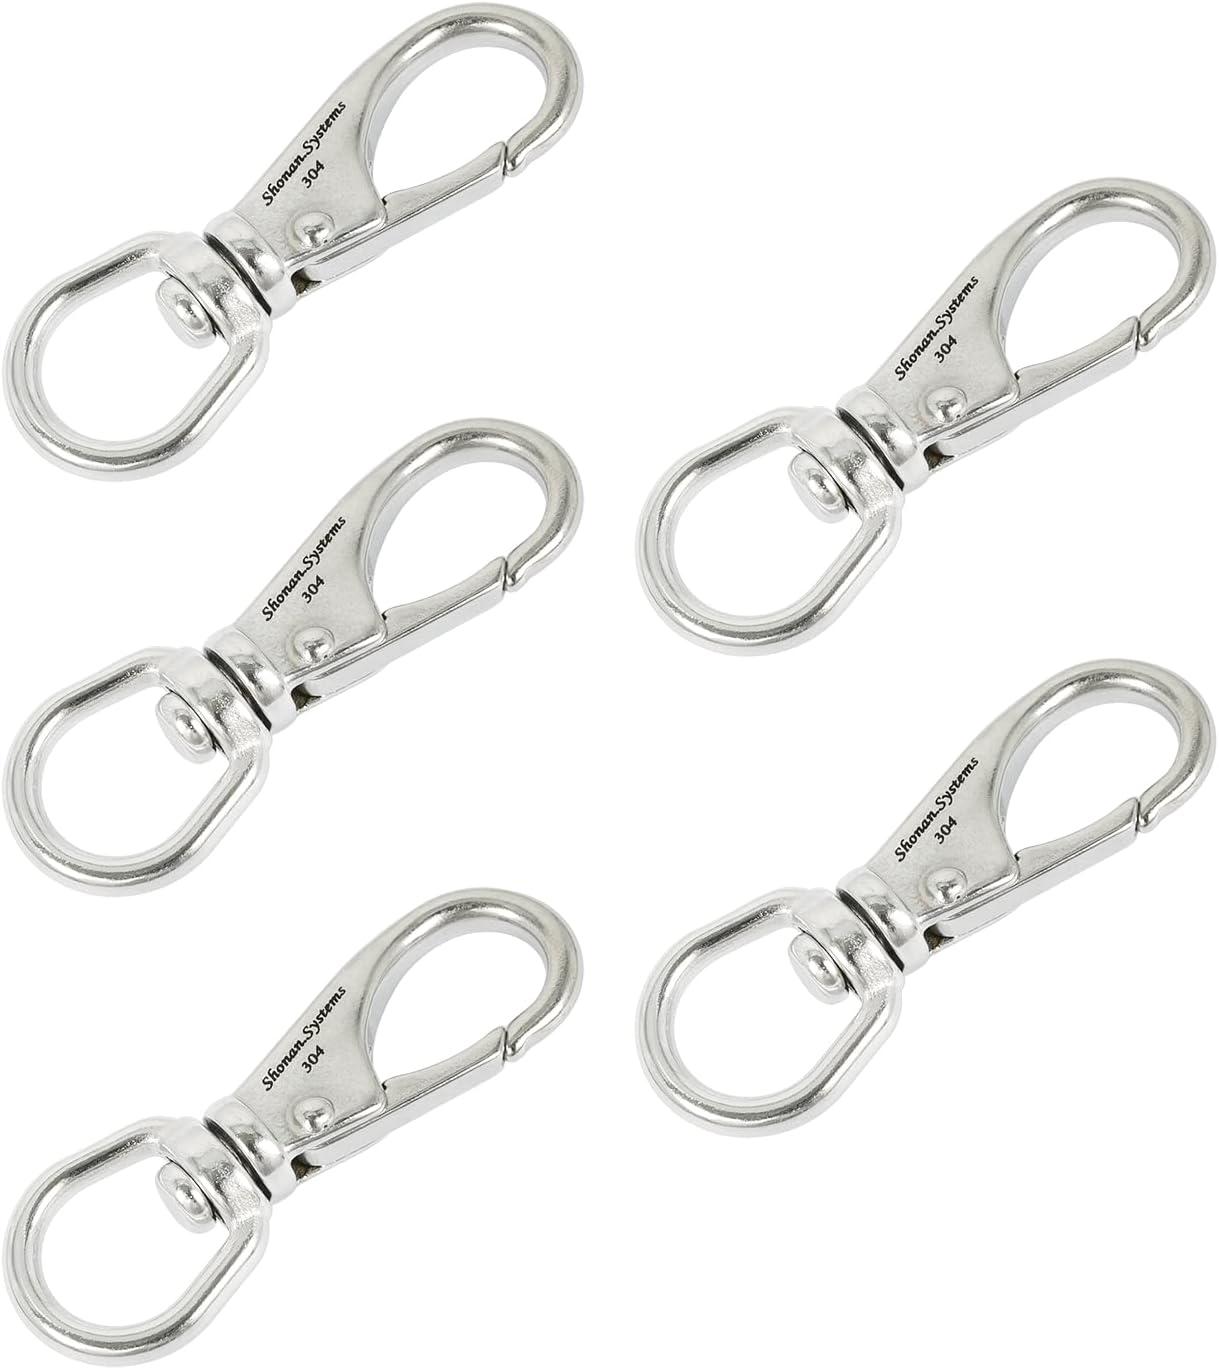 SHONAN 2.7 Inch Swivel Snap Hooks, 5 Pack Small Stainless Steel Spring Clips,  Flag Pole Clips, Scuba Diving Clips Spring Hooks for Dog leashes,  Keychains, Bird Feeders, Pet Chains and More